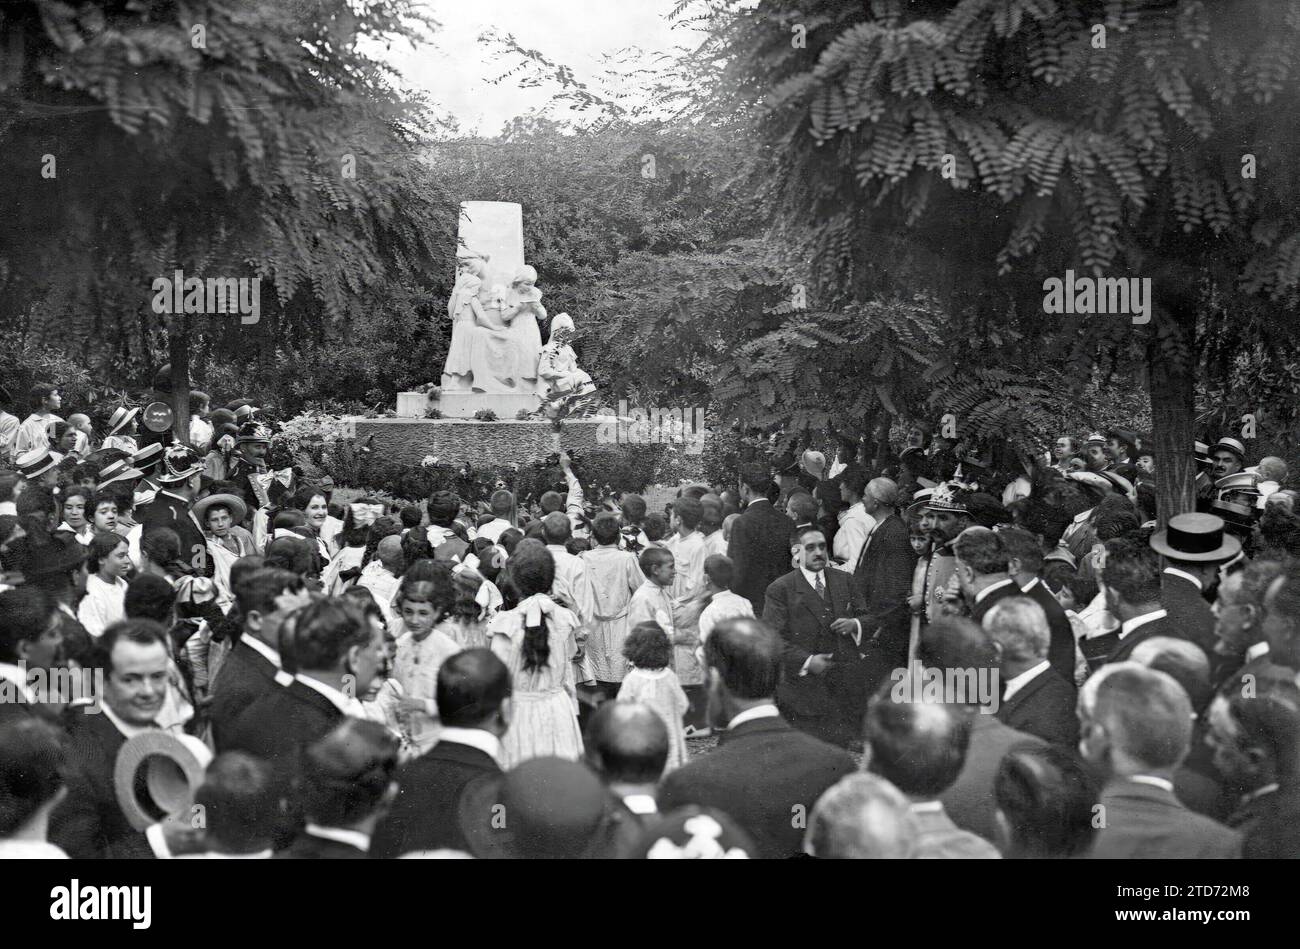 06/30/1916. Tribute to an illustrious sculptor in Barcelona - the Children of the Forest Schools, singing a hymn before the sculpture group of José Llimona 'la Maternidad' donation of the distinguished artist for the school Gardens. Credit: Album / Archivo ABC / Josep Brangulí Stock Photo